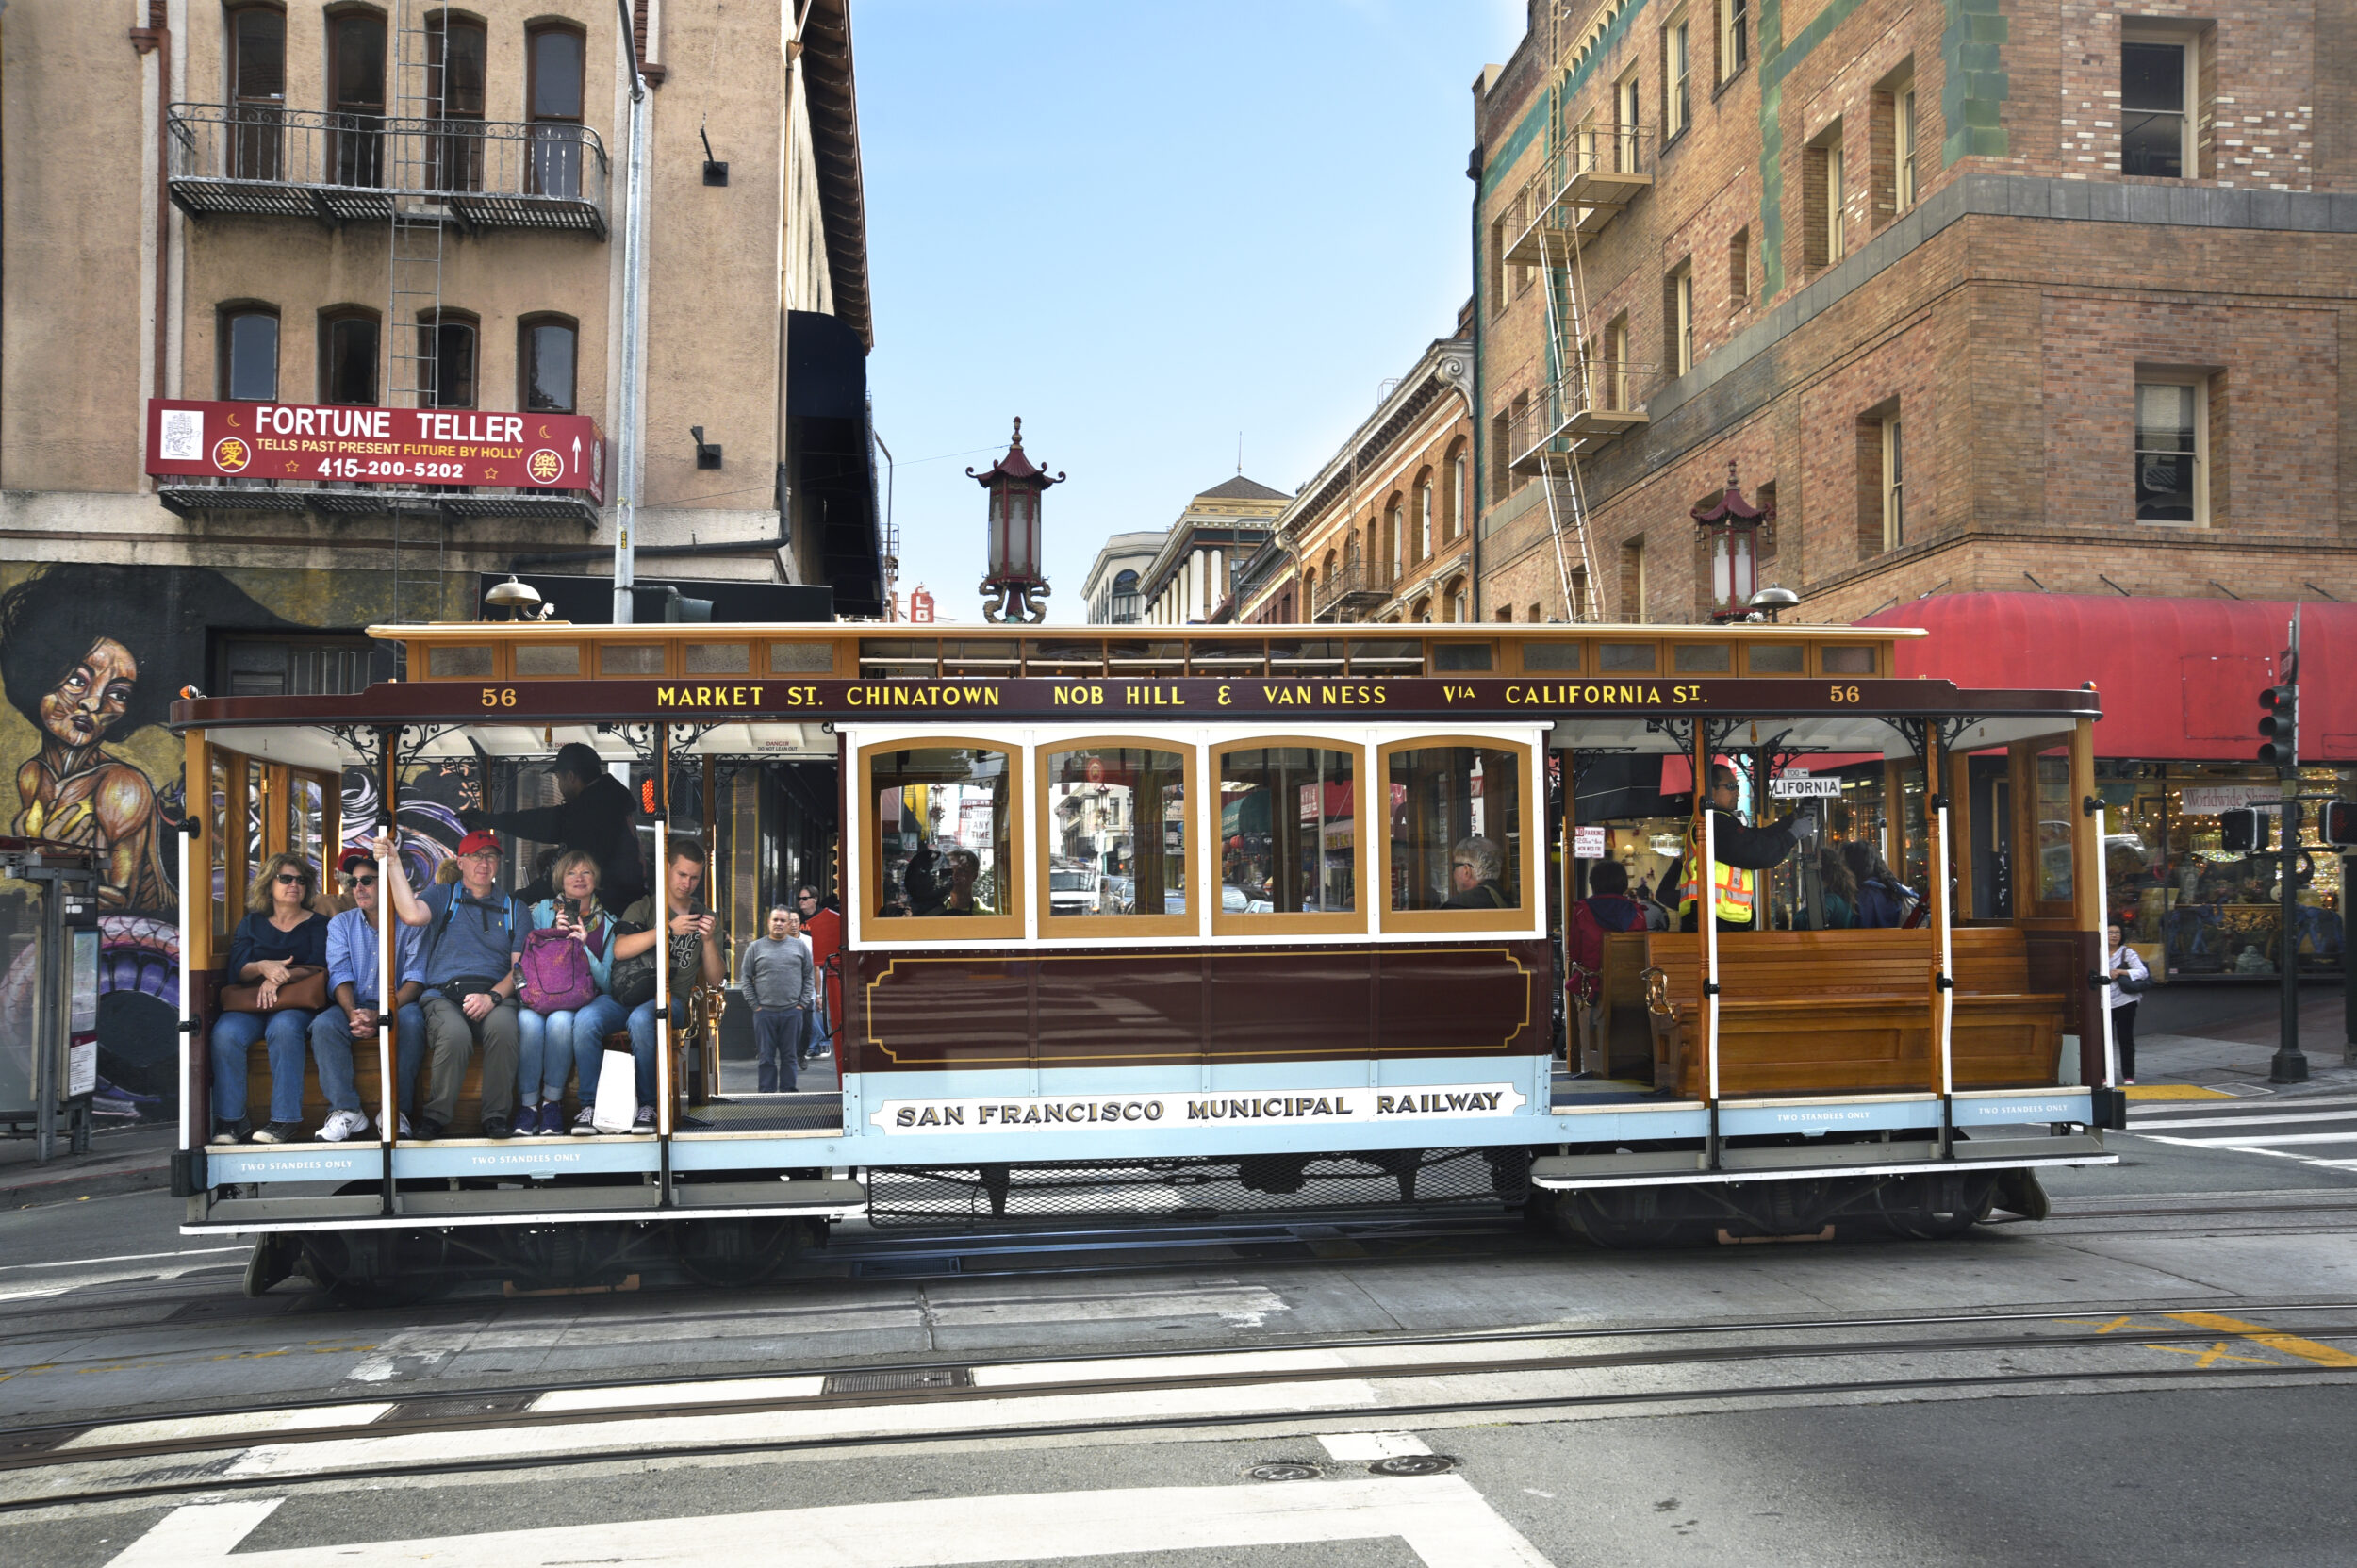 A cable car travels along tracks in San Francisco's chinatown with tourists aboard.